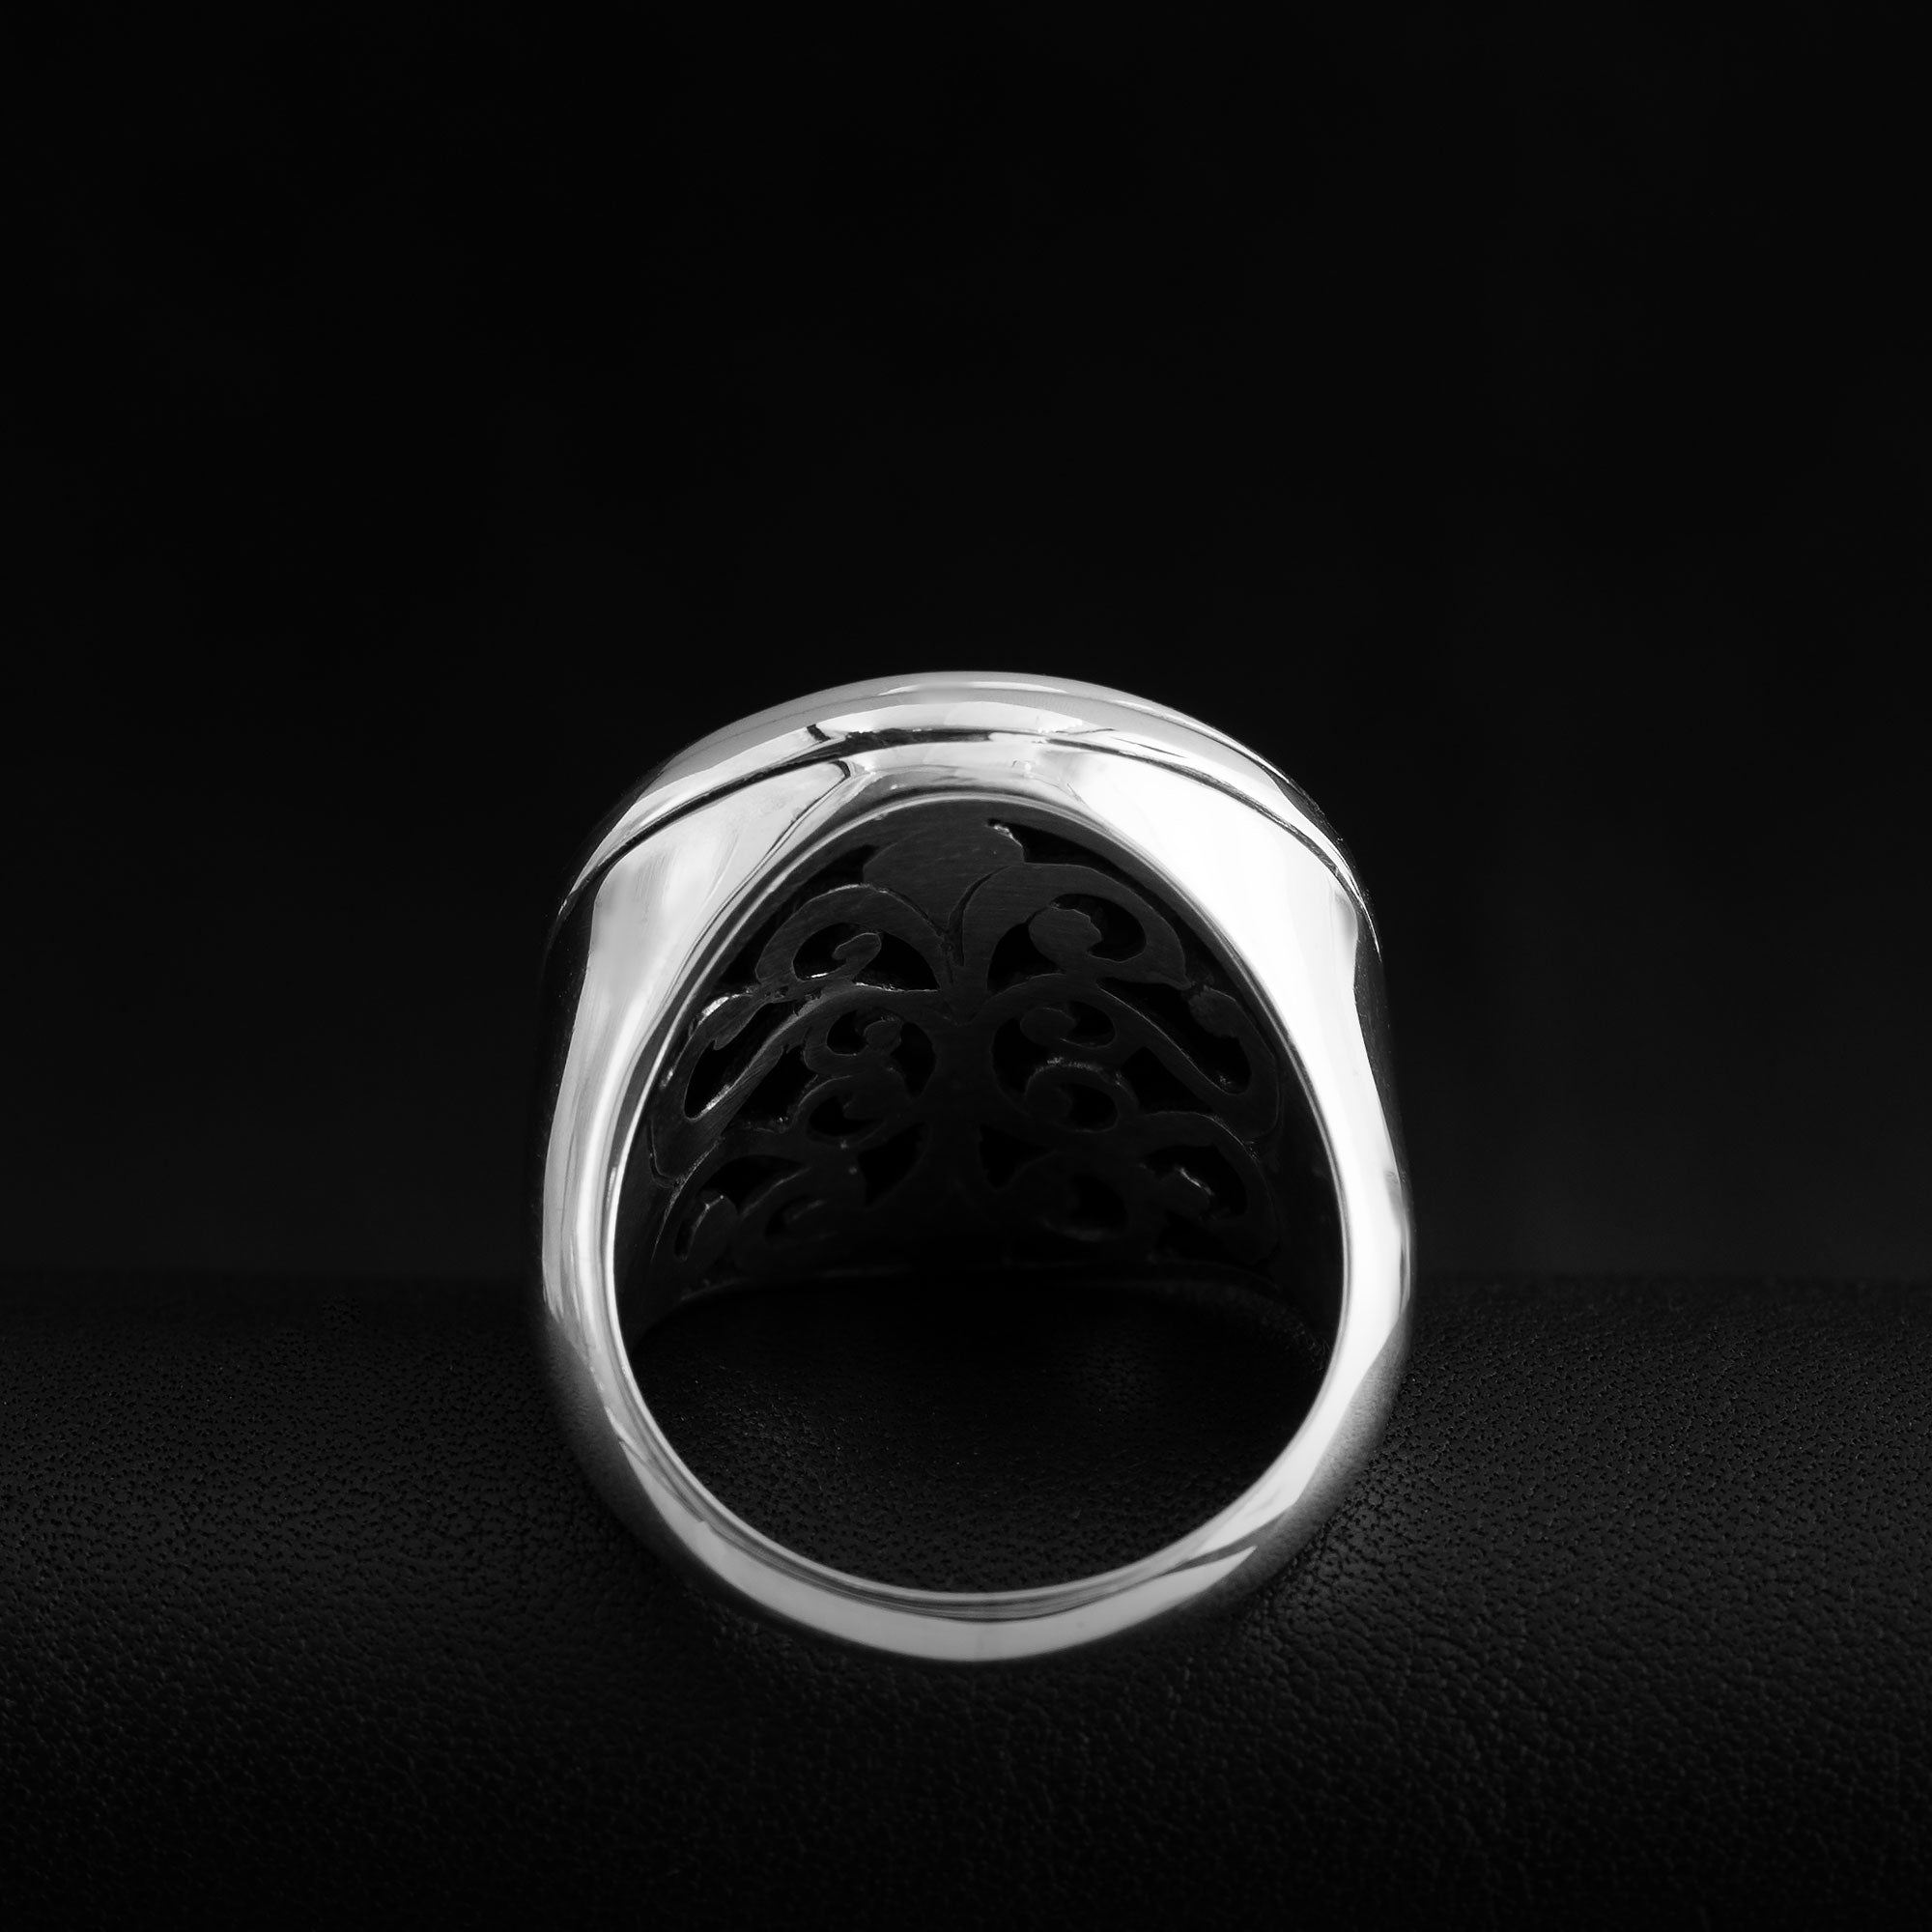 Enigmatic Skull Countenance Sterling Silver Ring